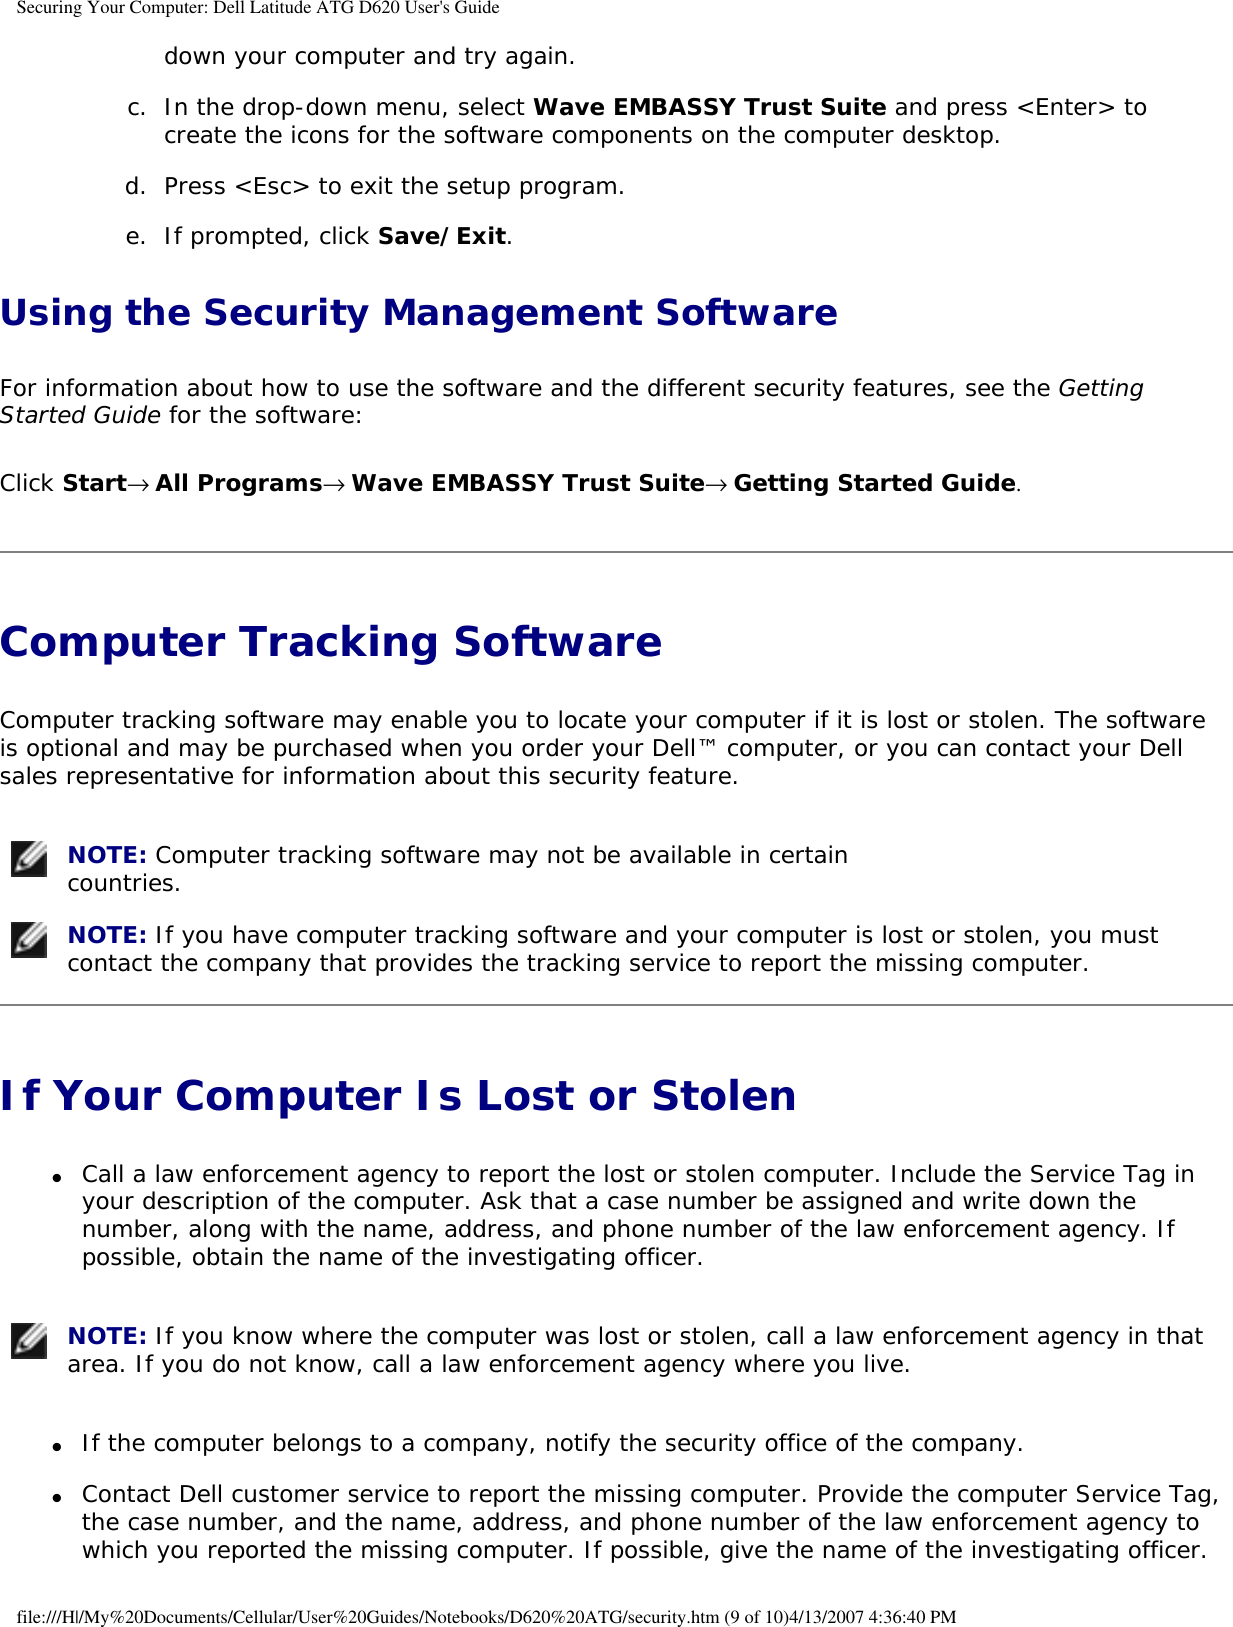 Securing Your Computer: Dell Latitude ATG D620 User&apos;s Guidedown your computer and try again.   c.  In the drop-down menu, select Wave EMBASSY Trust Suite and press &lt;Enter&gt; to create the icons for the software components on the computer desktop.   d.  Press &lt;Esc&gt; to exit the setup program.   e.  If prompted, click Save/Exit.   Using the Security Management SoftwareFor information about how to use the software and the different security features, see the Getting Started Guide for the software: Click Start→ All Programs→ Wave EMBASSY Trust Suite→ Getting Started Guide.Computer Tracking Software Computer tracking software may enable you to locate your computer if it is lost or stolen. The software is optional and may be purchased when you order your Dell™ computer, or you can contact your Dell sales representative for information about this security feature. NOTE: Computer tracking software may not be available in certain countries.  NOTE: If you have computer tracking software and your computer is lost or stolen, you must contact the company that provides the tracking service to report the missing computer. If Your Computer Is Lost or Stolen ●     Call a law enforcement agency to report the lost or stolen computer. Include the Service Tag in your description of the computer. Ask that a case number be assigned and write down the number, along with the name, address, and phone number of the law enforcement agency. If possible, obtain the name of the investigating officer.   NOTE: If you know where the computer was lost or stolen, call a law enforcement agency in that area. If you do not know, call a law enforcement agency where you live. ●     If the computer belongs to a company, notify the security office of the company.  ●     Contact Dell customer service to report the missing computer. Provide the computer Service Tag, the case number, and the name, address, and phone number of the law enforcement agency to which you reported the missing computer. If possible, give the name of the investigating officer. file:///H|/My%20Documents/Cellular/User%20Guides/Notebooks/D620%20ATG/security.htm (9 of 10)4/13/2007 4:36:40 PM